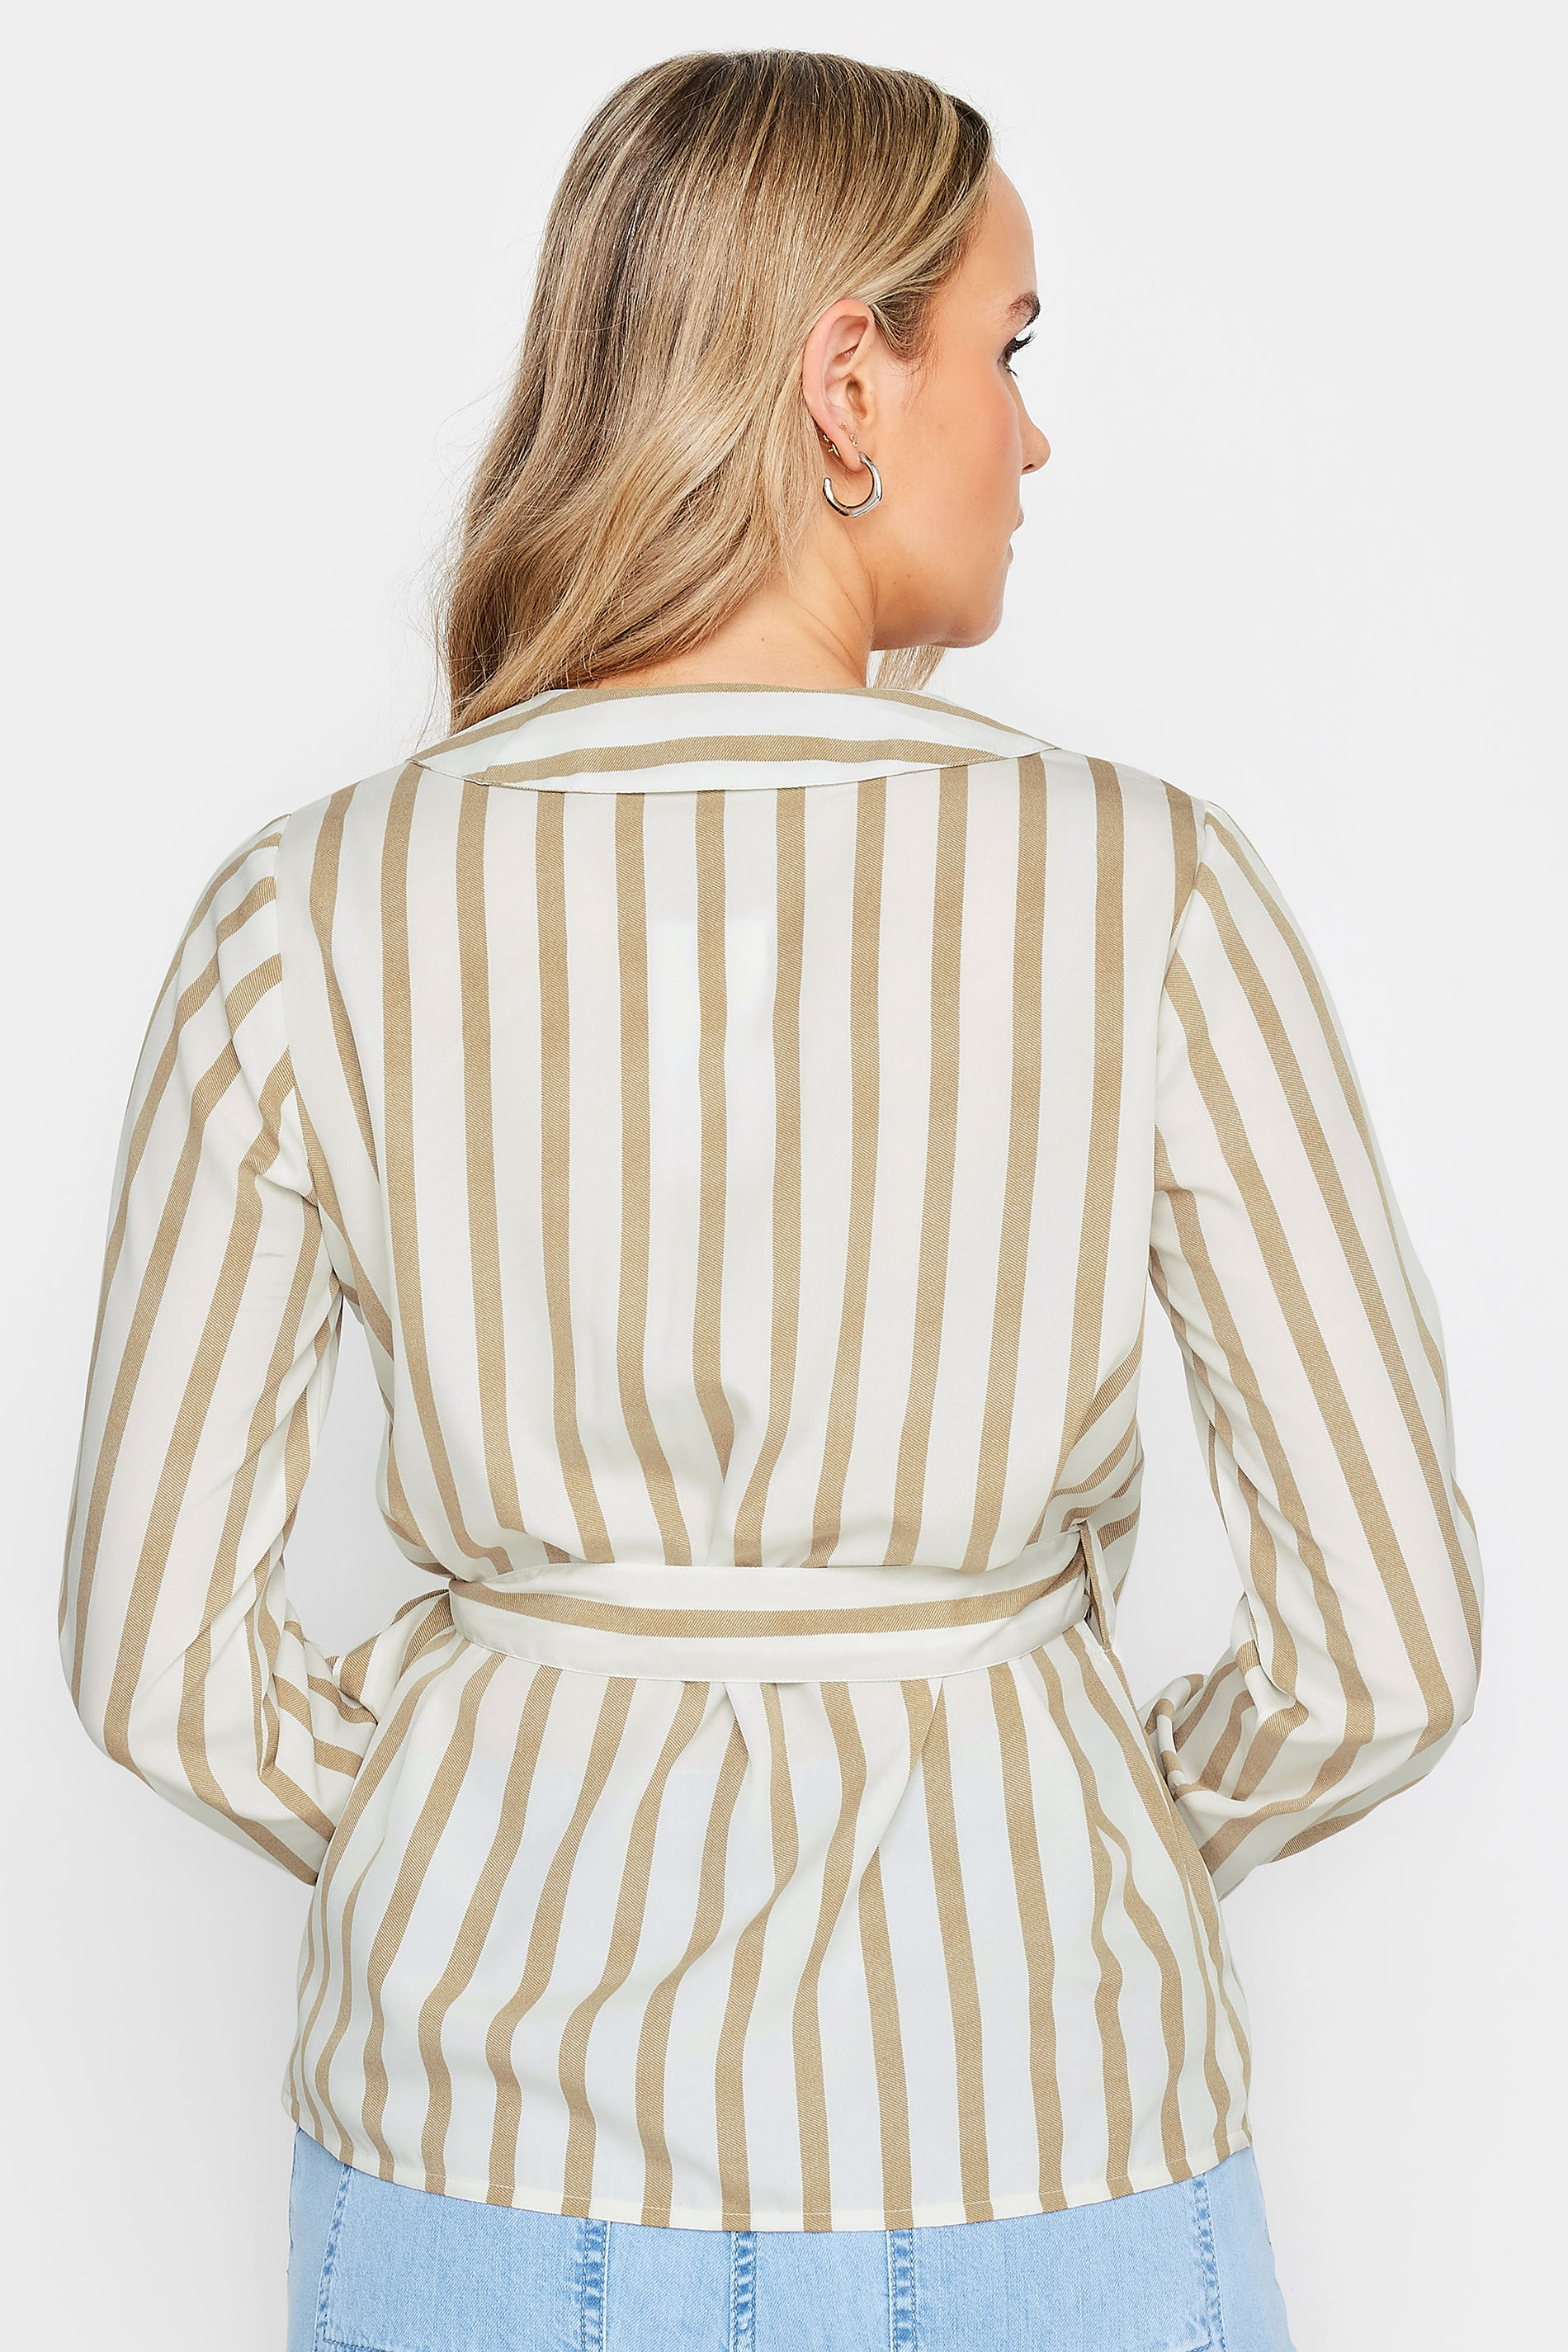 LTS Tall Womens Brown & White Stripe Collared Wrap Top | Long Tall Sally 3